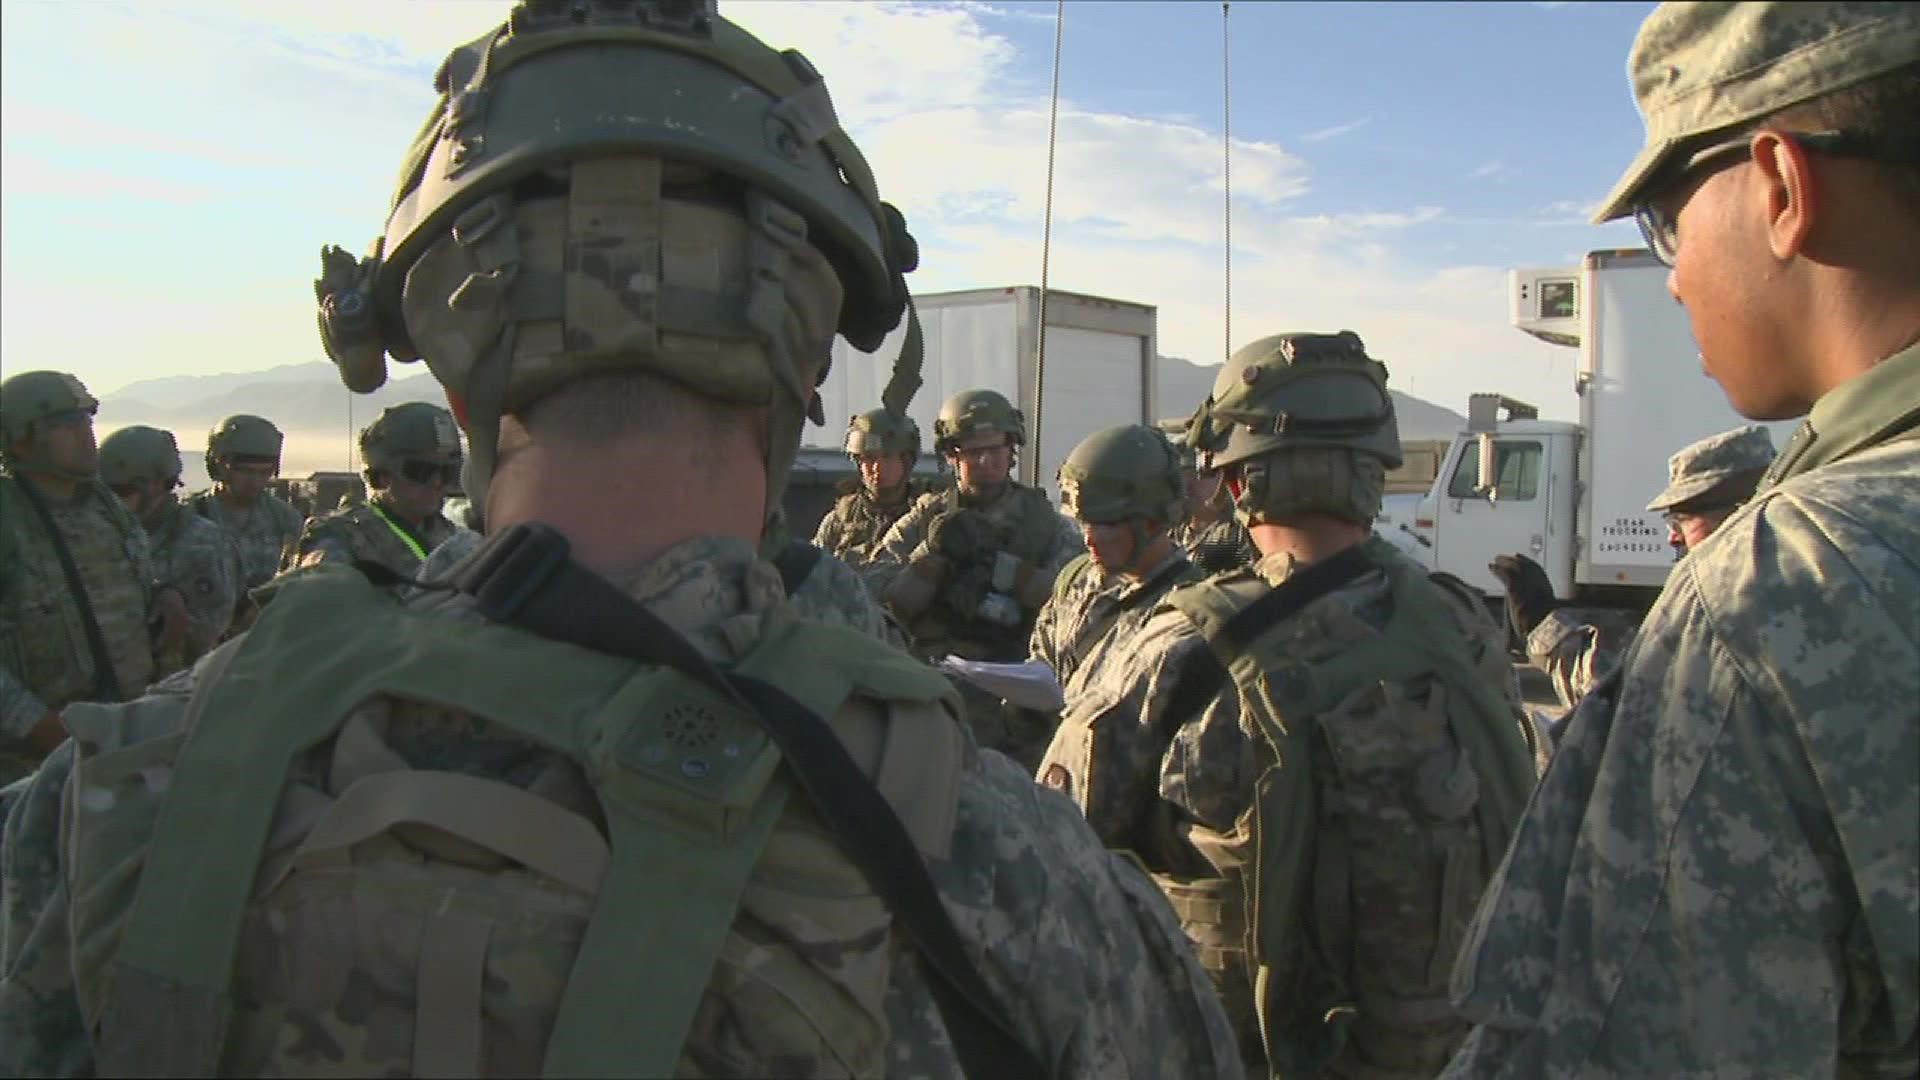 About 250 soldiers from National Guard companies based in Mason City and Iowa City are preparing to mobilize to Poland in 2022.